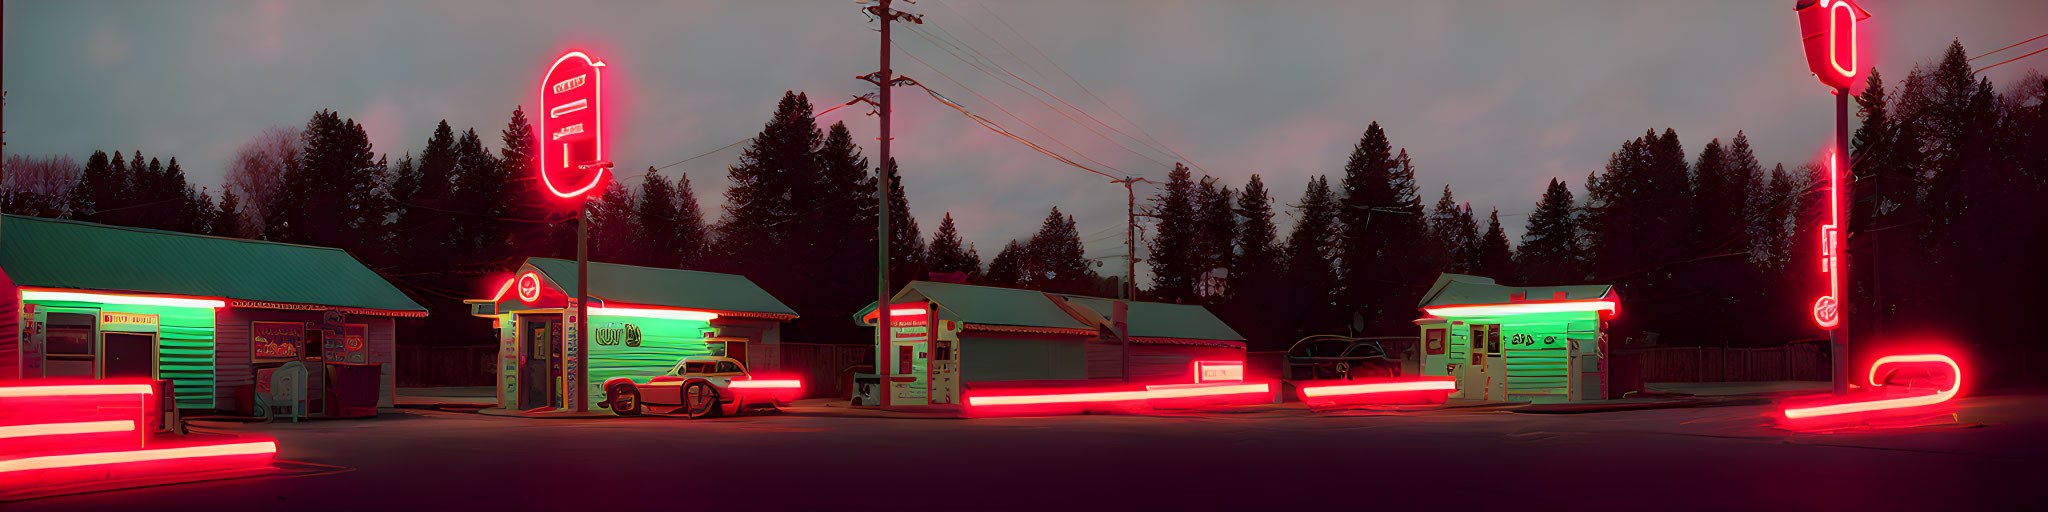 Vintage Motel Twilight Scene with Red Neon Signs & Classic Car